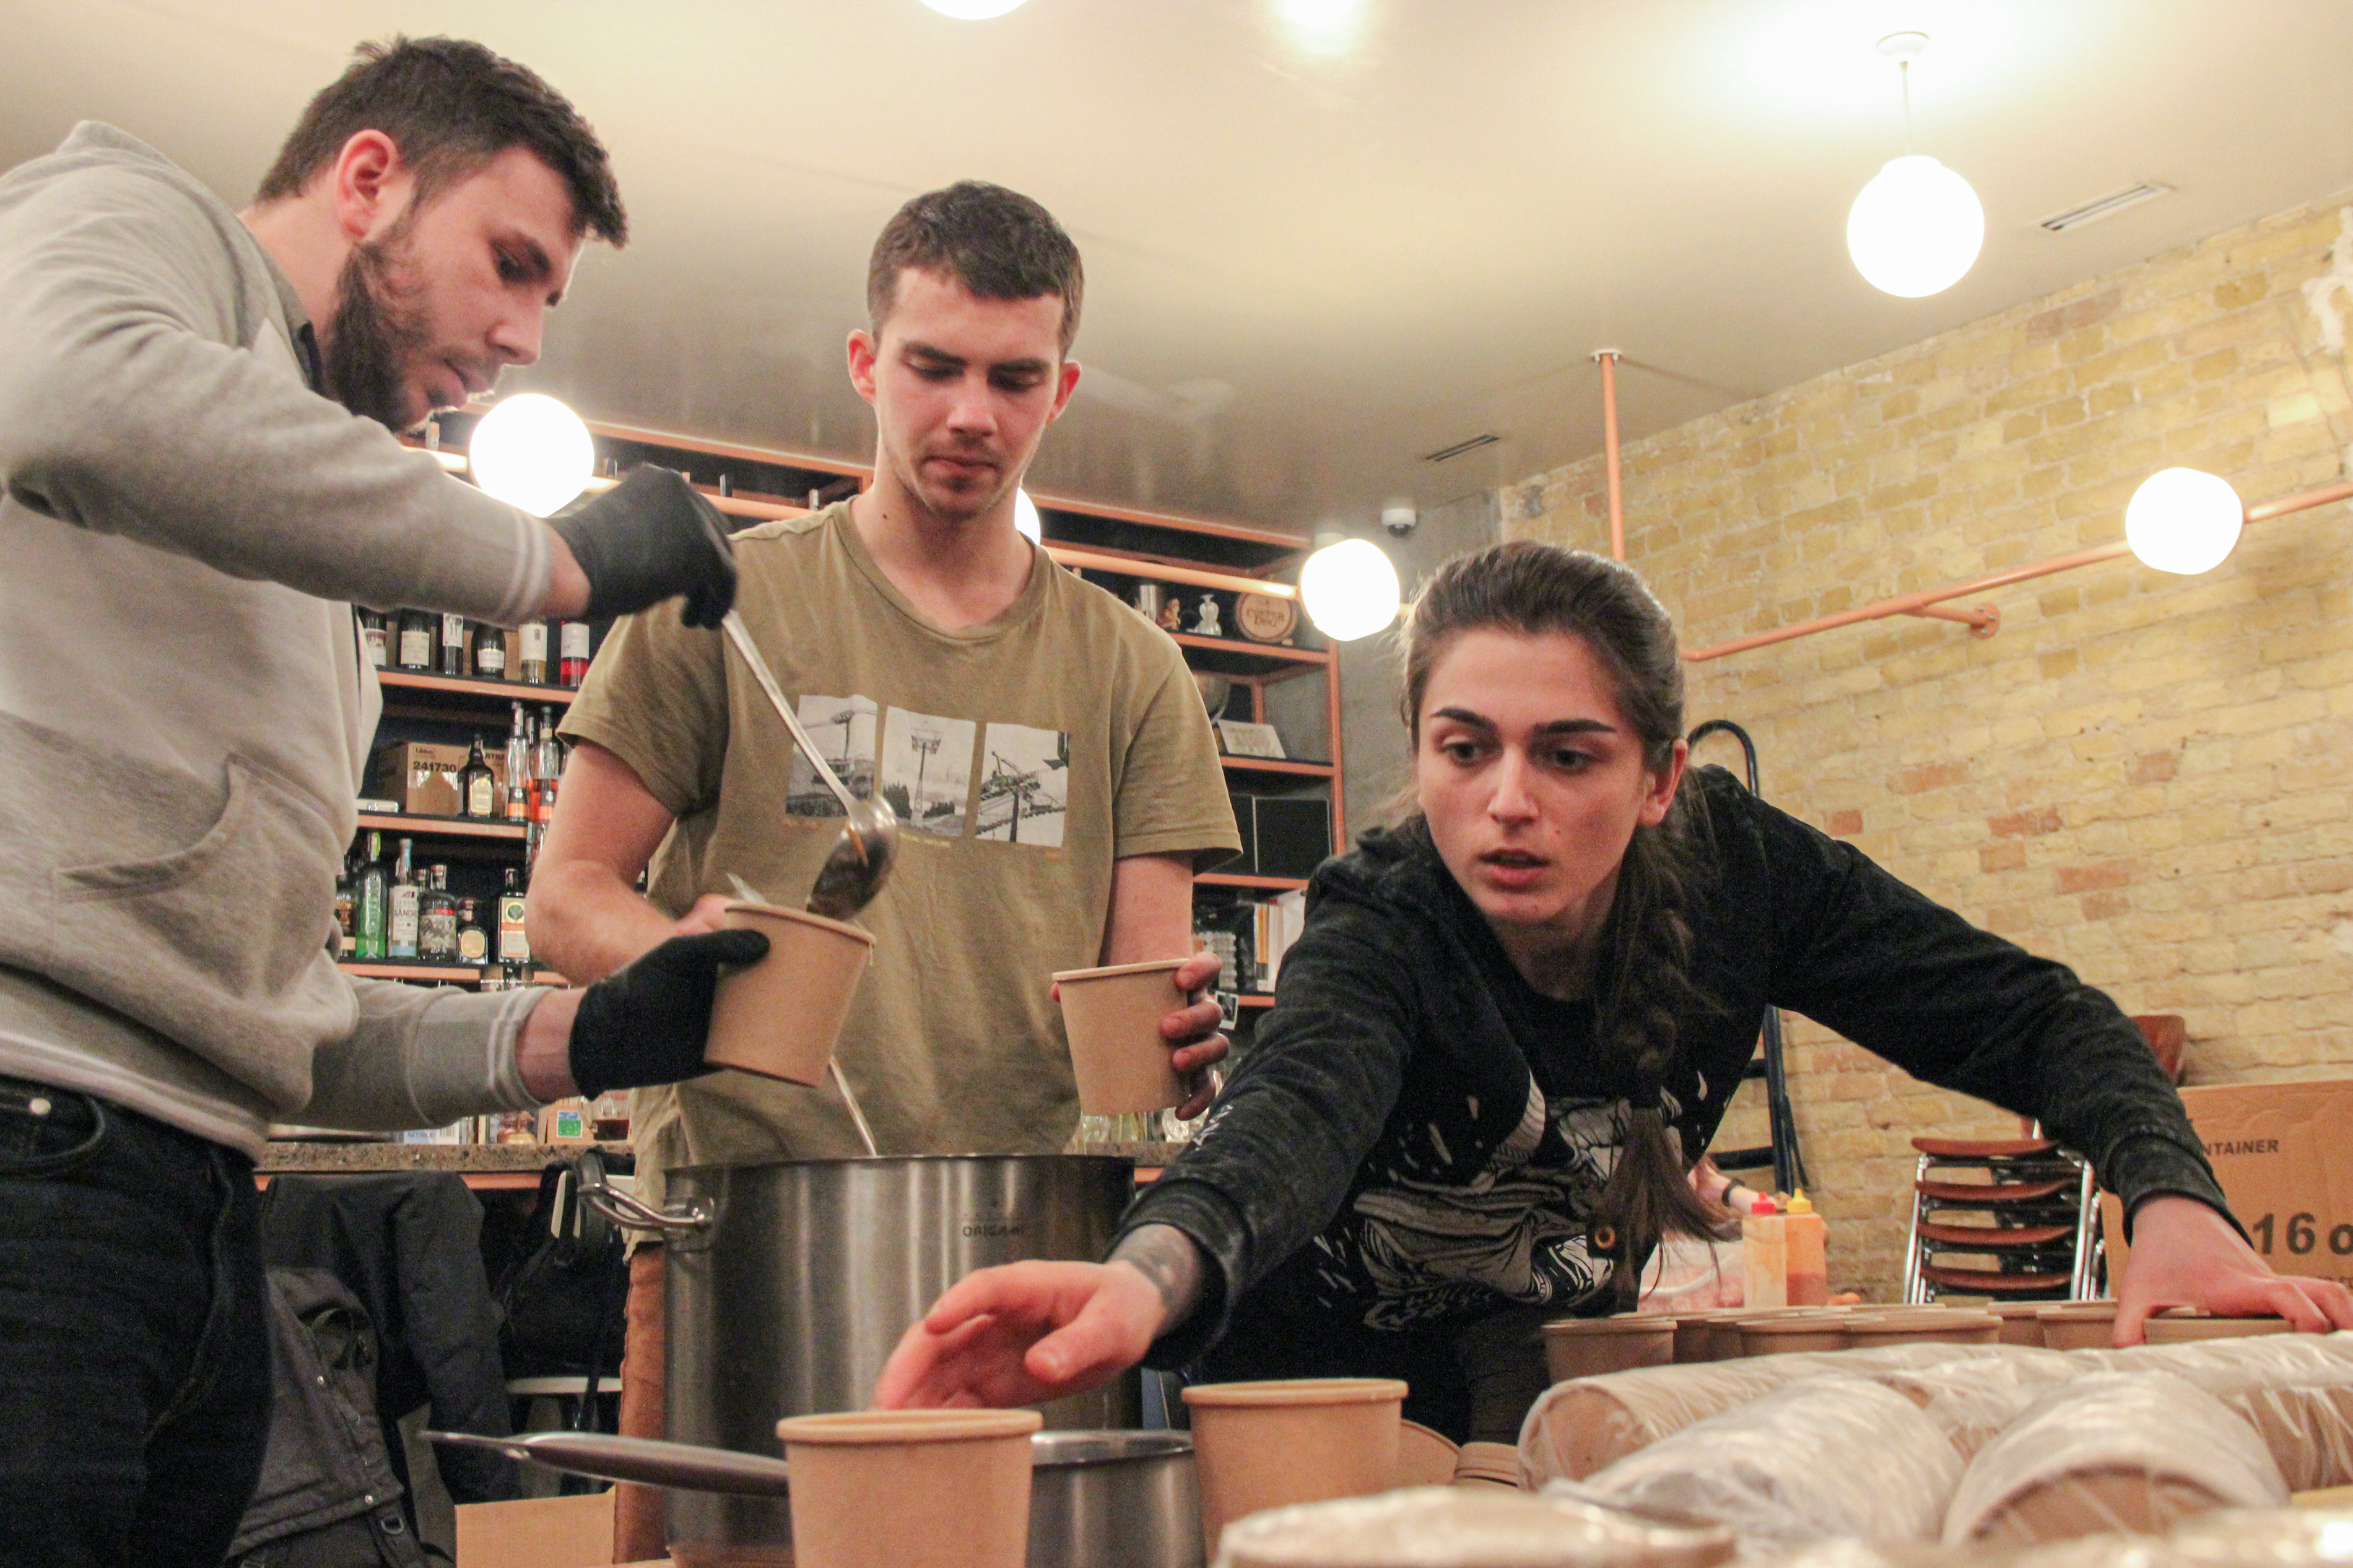 Trendy restaurants in Kyiv switch to cook for army, hospitals, elderly amid war